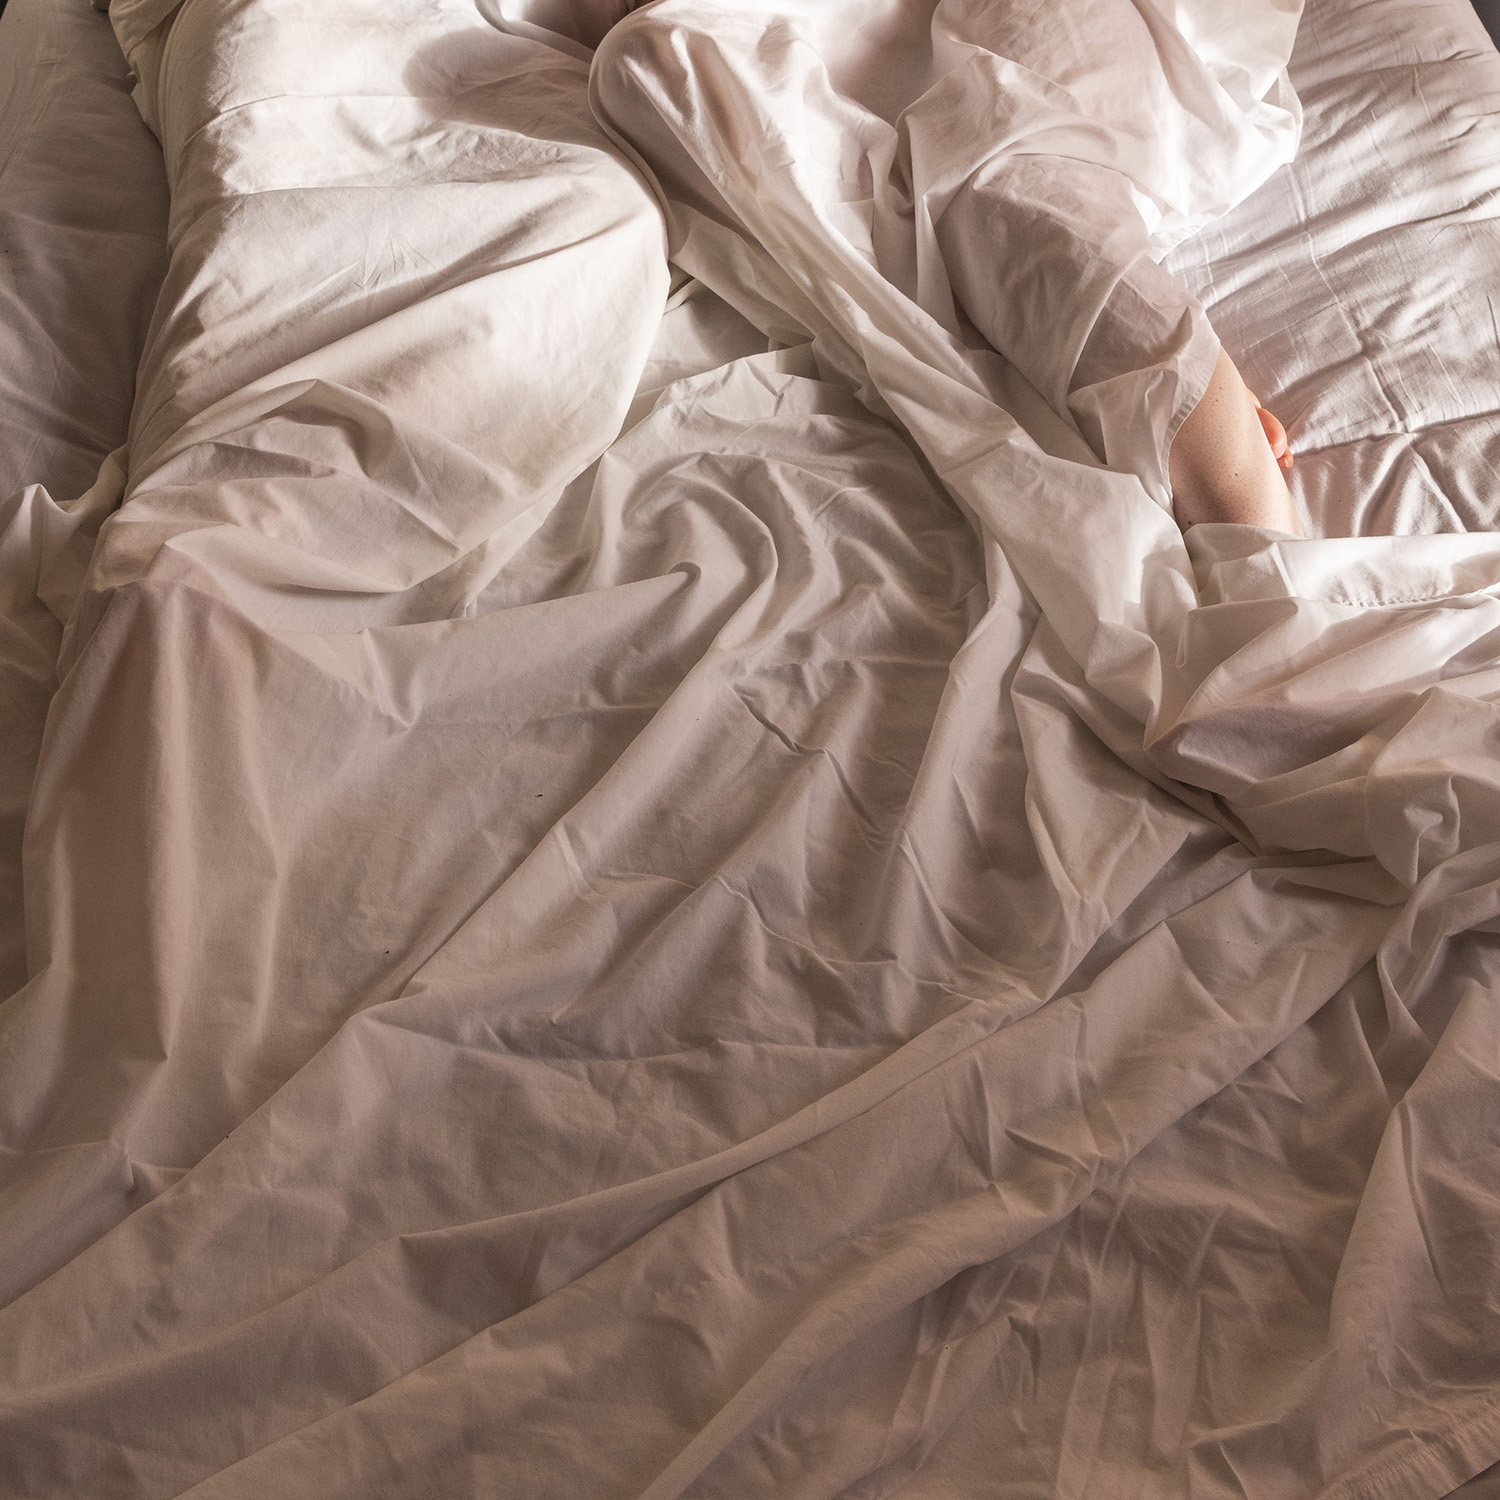 Colour photograph of closeup of bottom half of bed with messy sheets with two sets of legs under the bedsheets. 